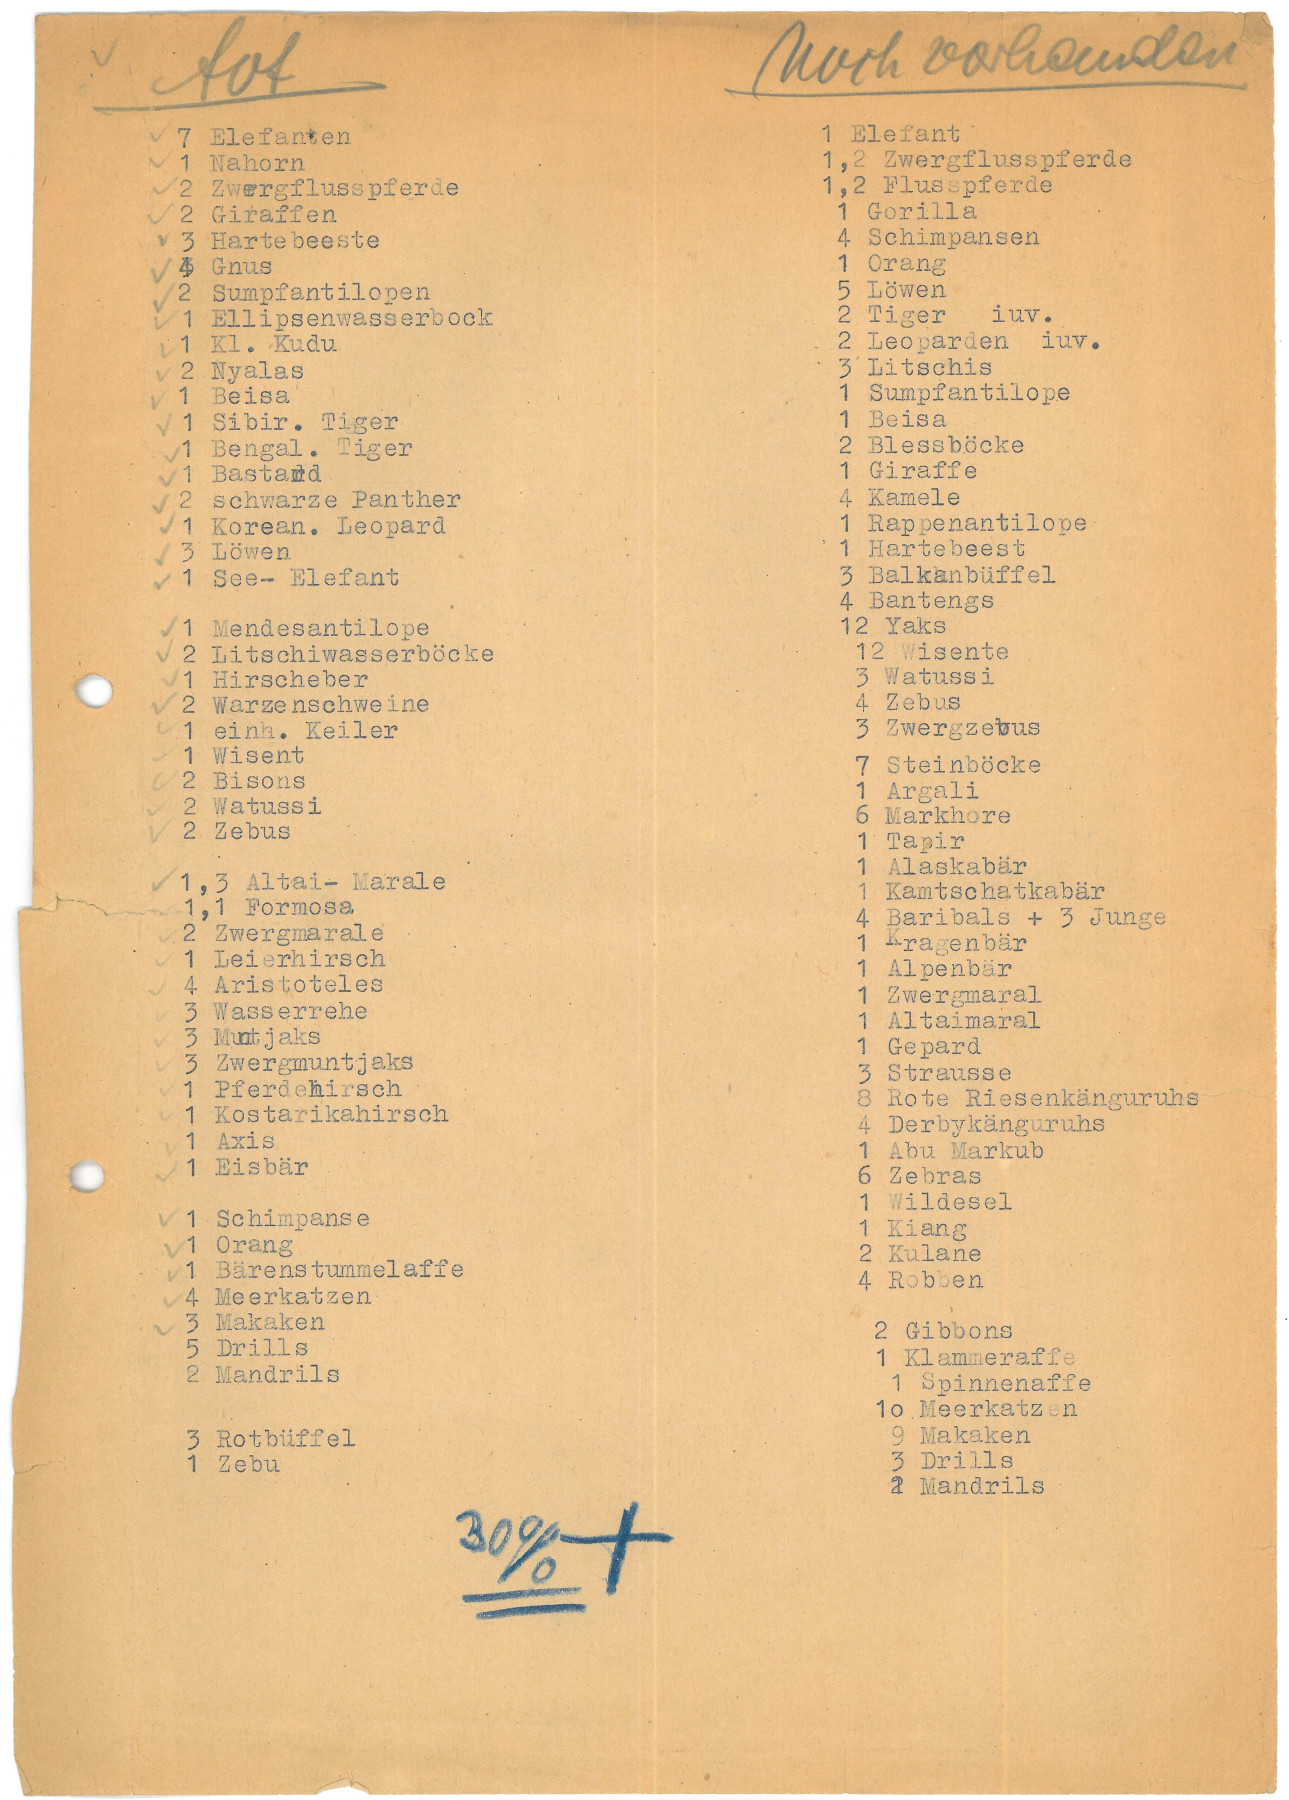 Punched typewritten piece of paper with two columns: “Dead” and “Still here”. Each column contains a list of animals; see transcript below.